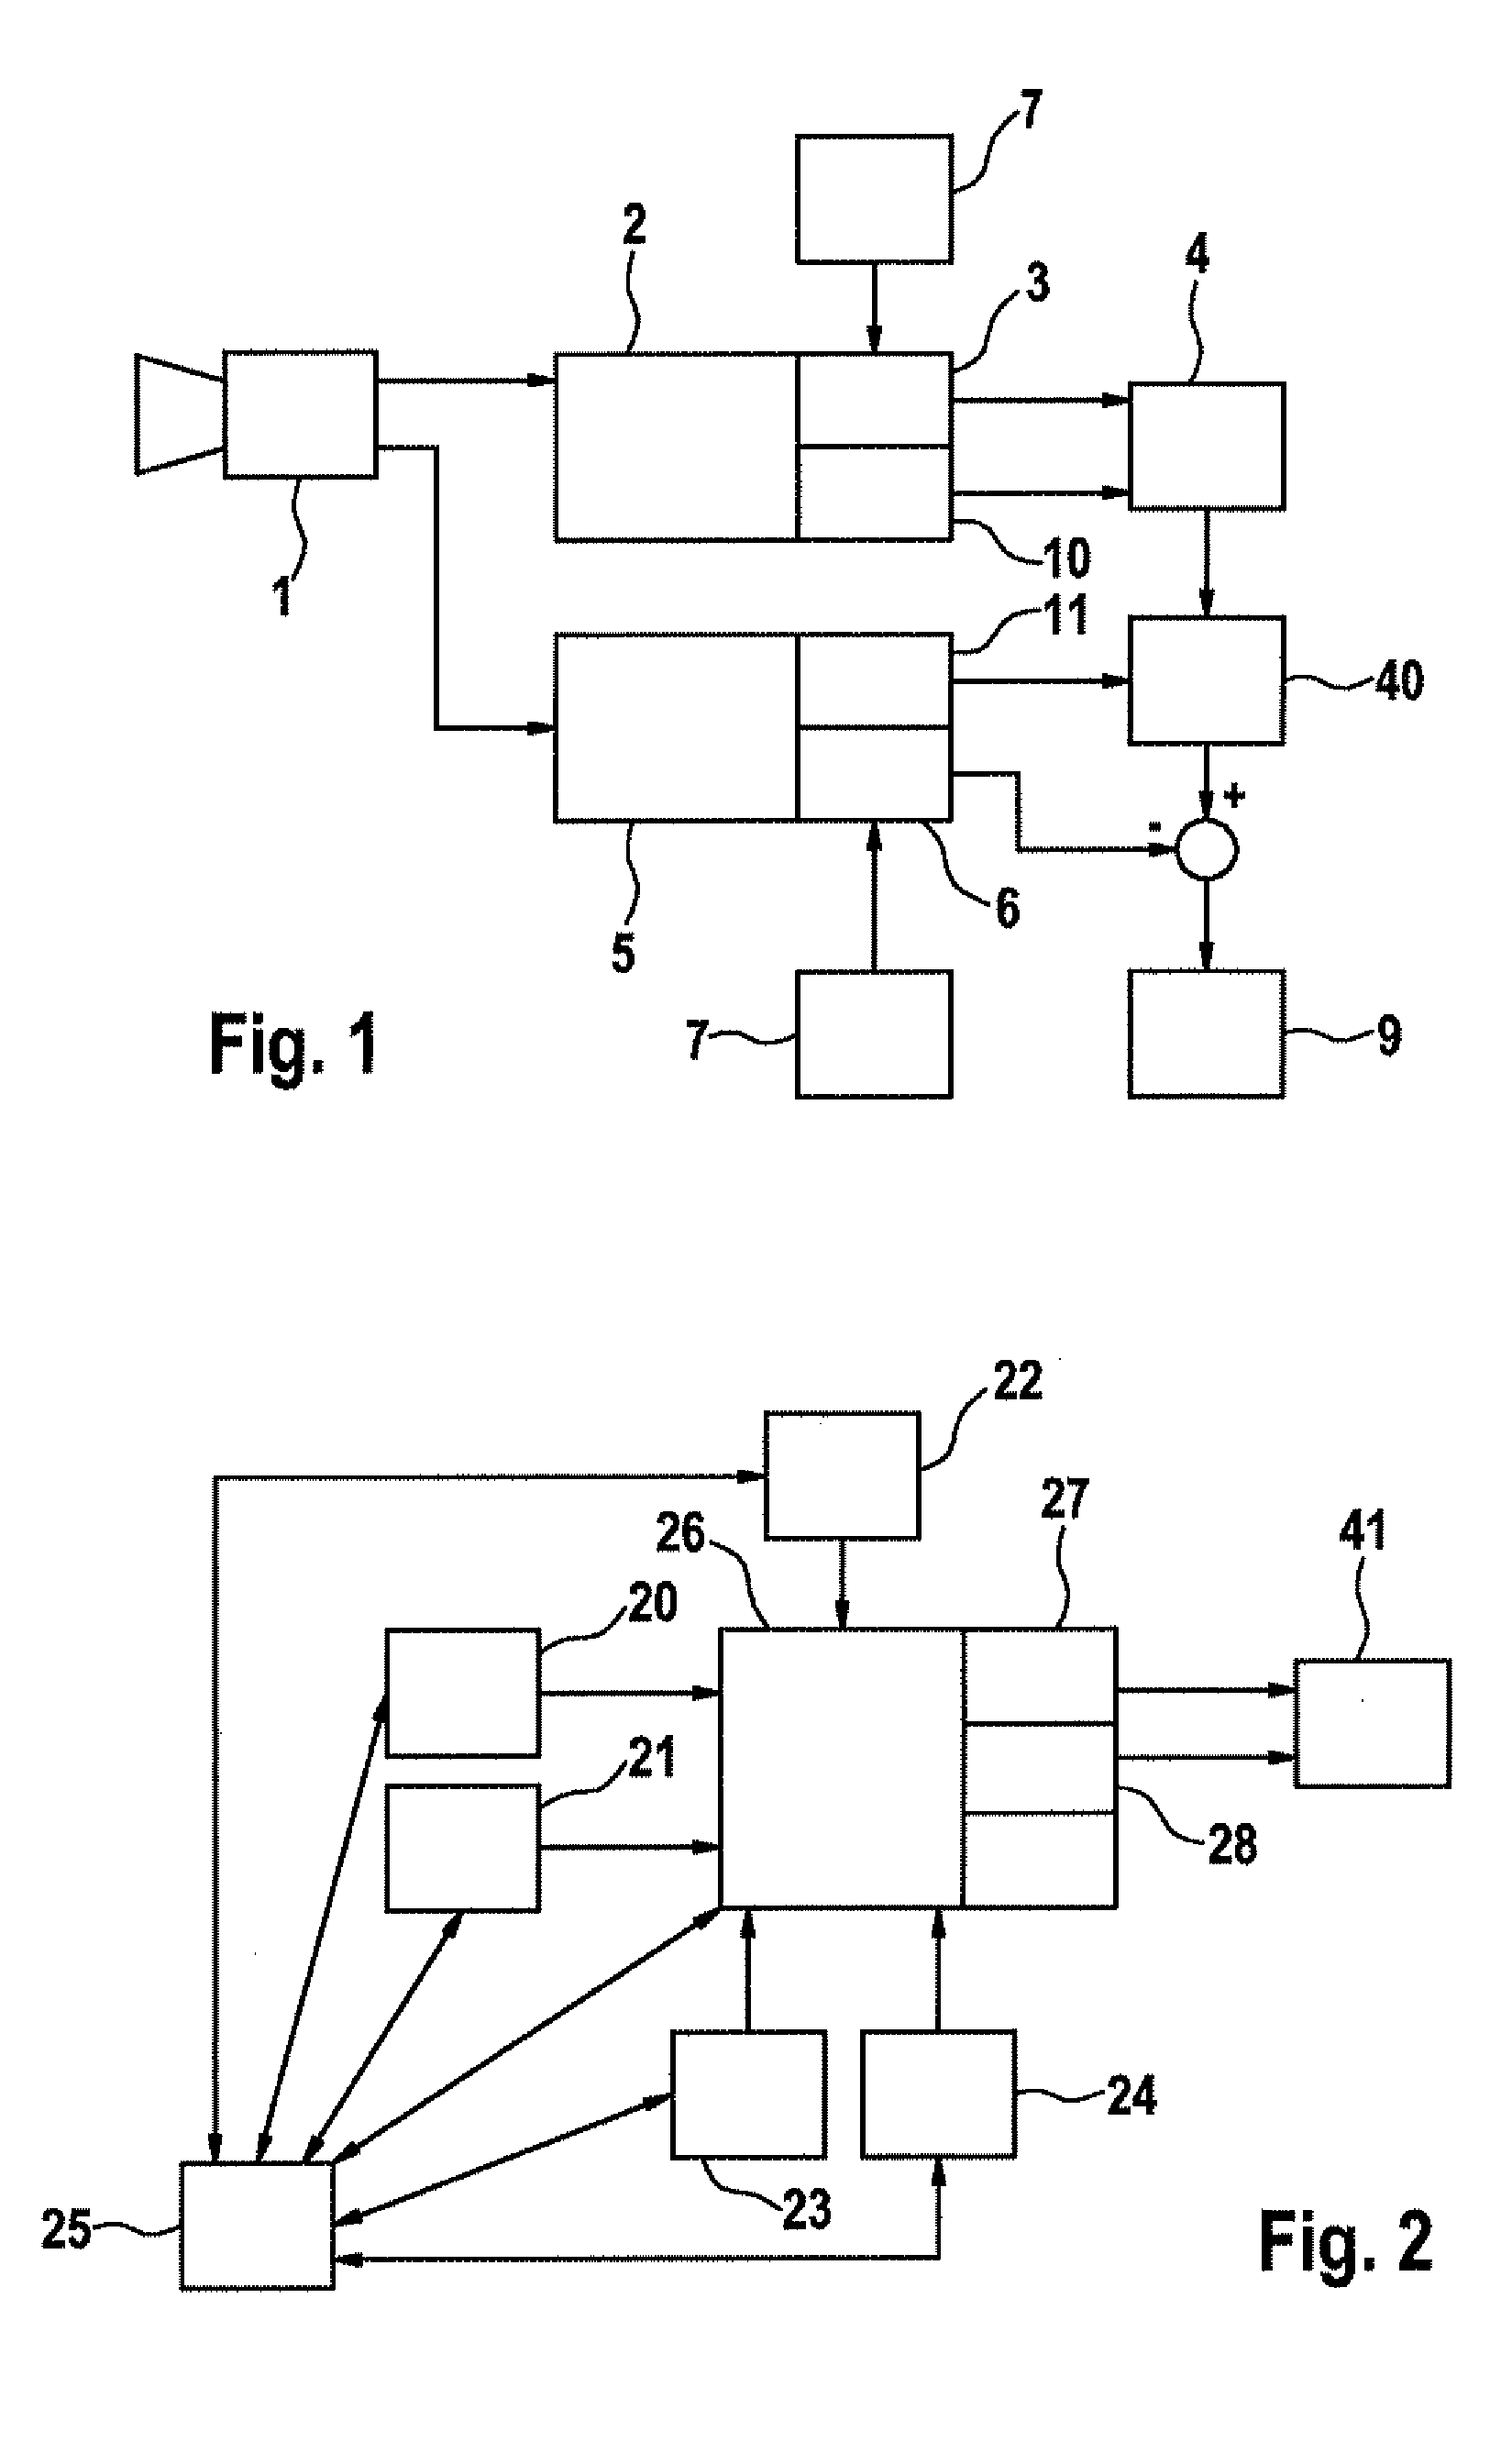 Traffic object recognition system, method for recognizing a traffic object, and method for setting up a traffic object recognition system